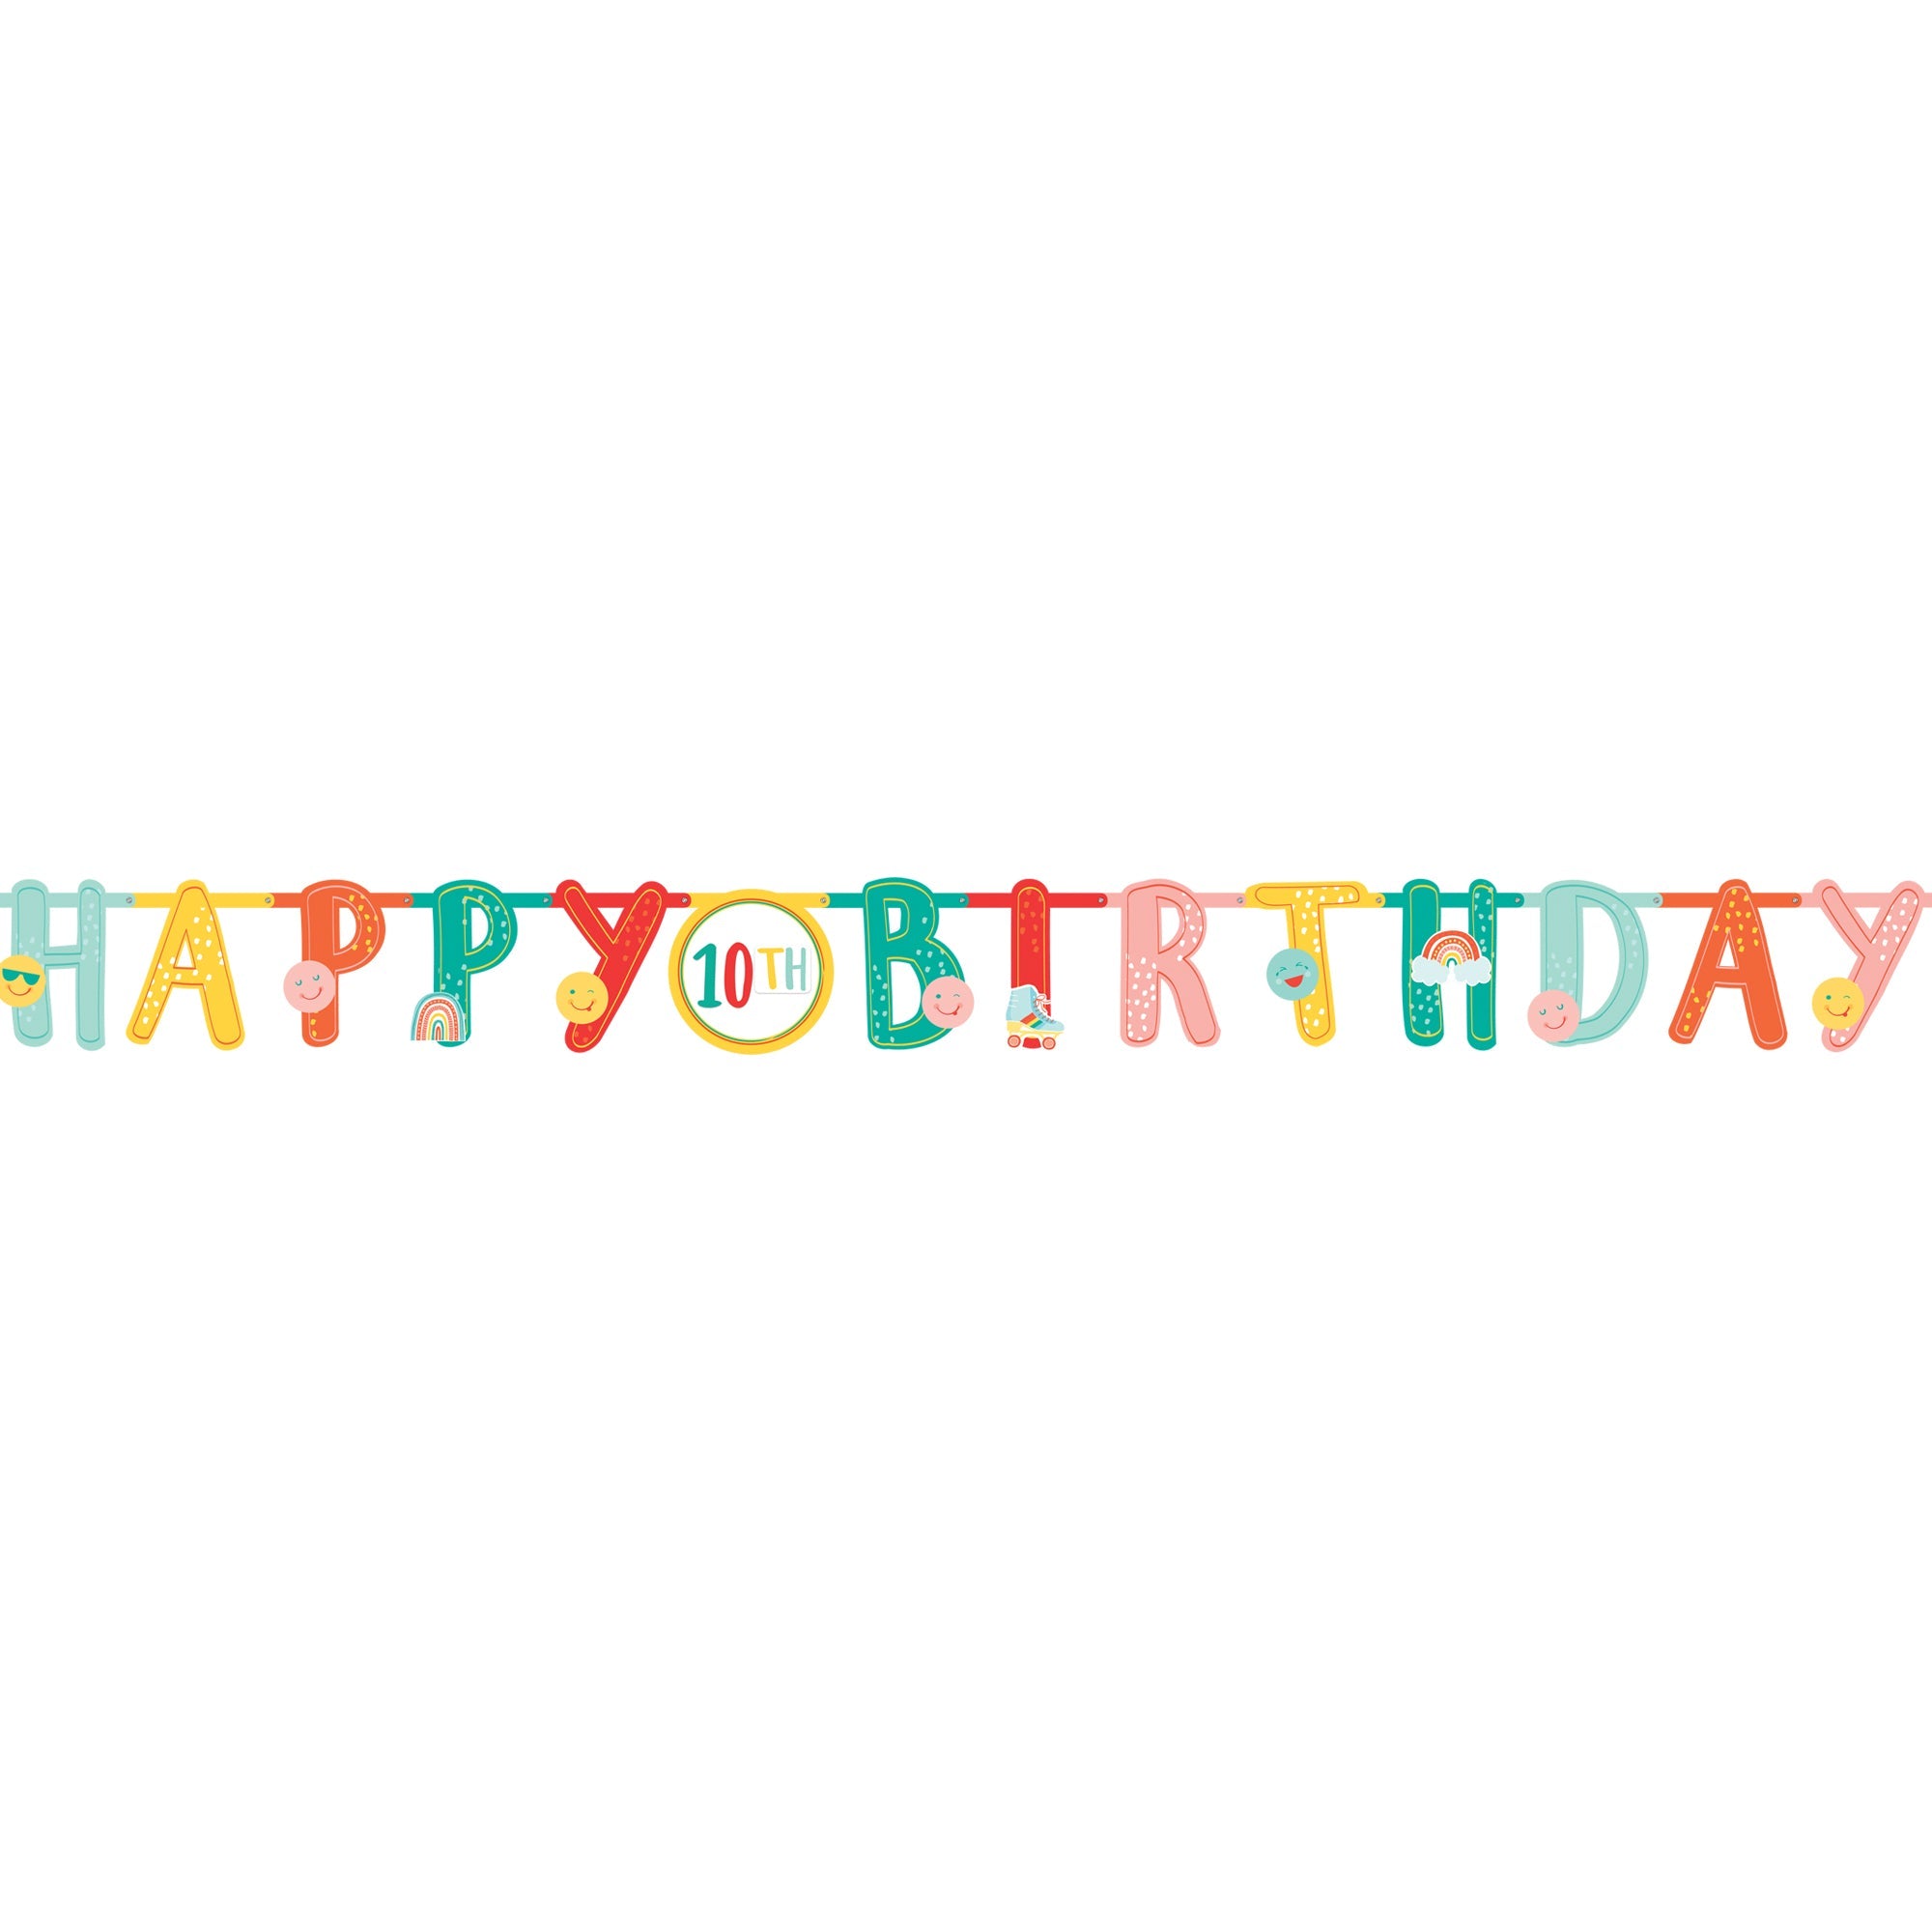 All Smiles and.Rainbows 10 1/2' x 10" mutlicolor Add-an-Age "Happy (add age) birthday" Letter Banner kit